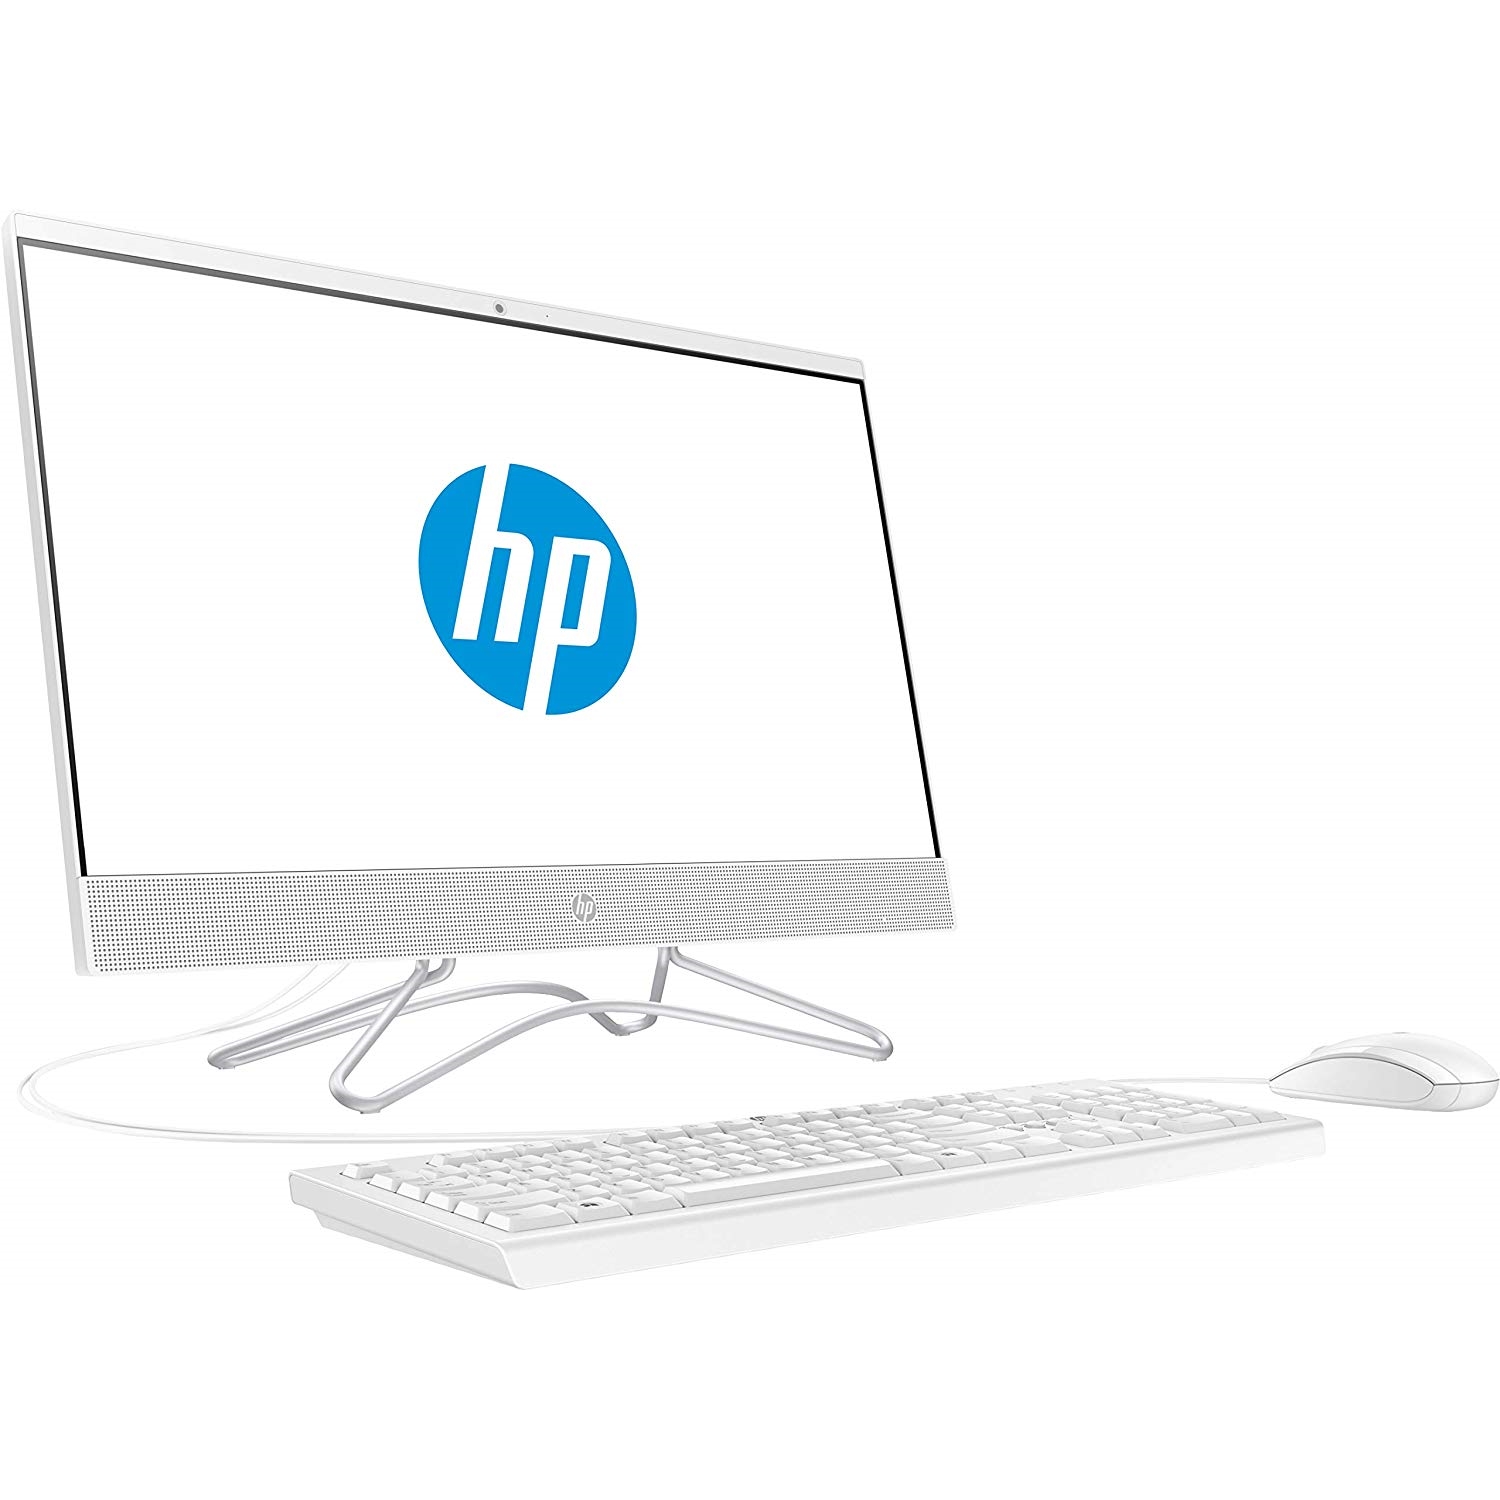 HP 24-F0007NT 4GS69EA i7-8700T 8GB 256SSD 2GB MX110 23.8" FHD IPS NONTOUCH FREDOOS ALL IN ONE PC